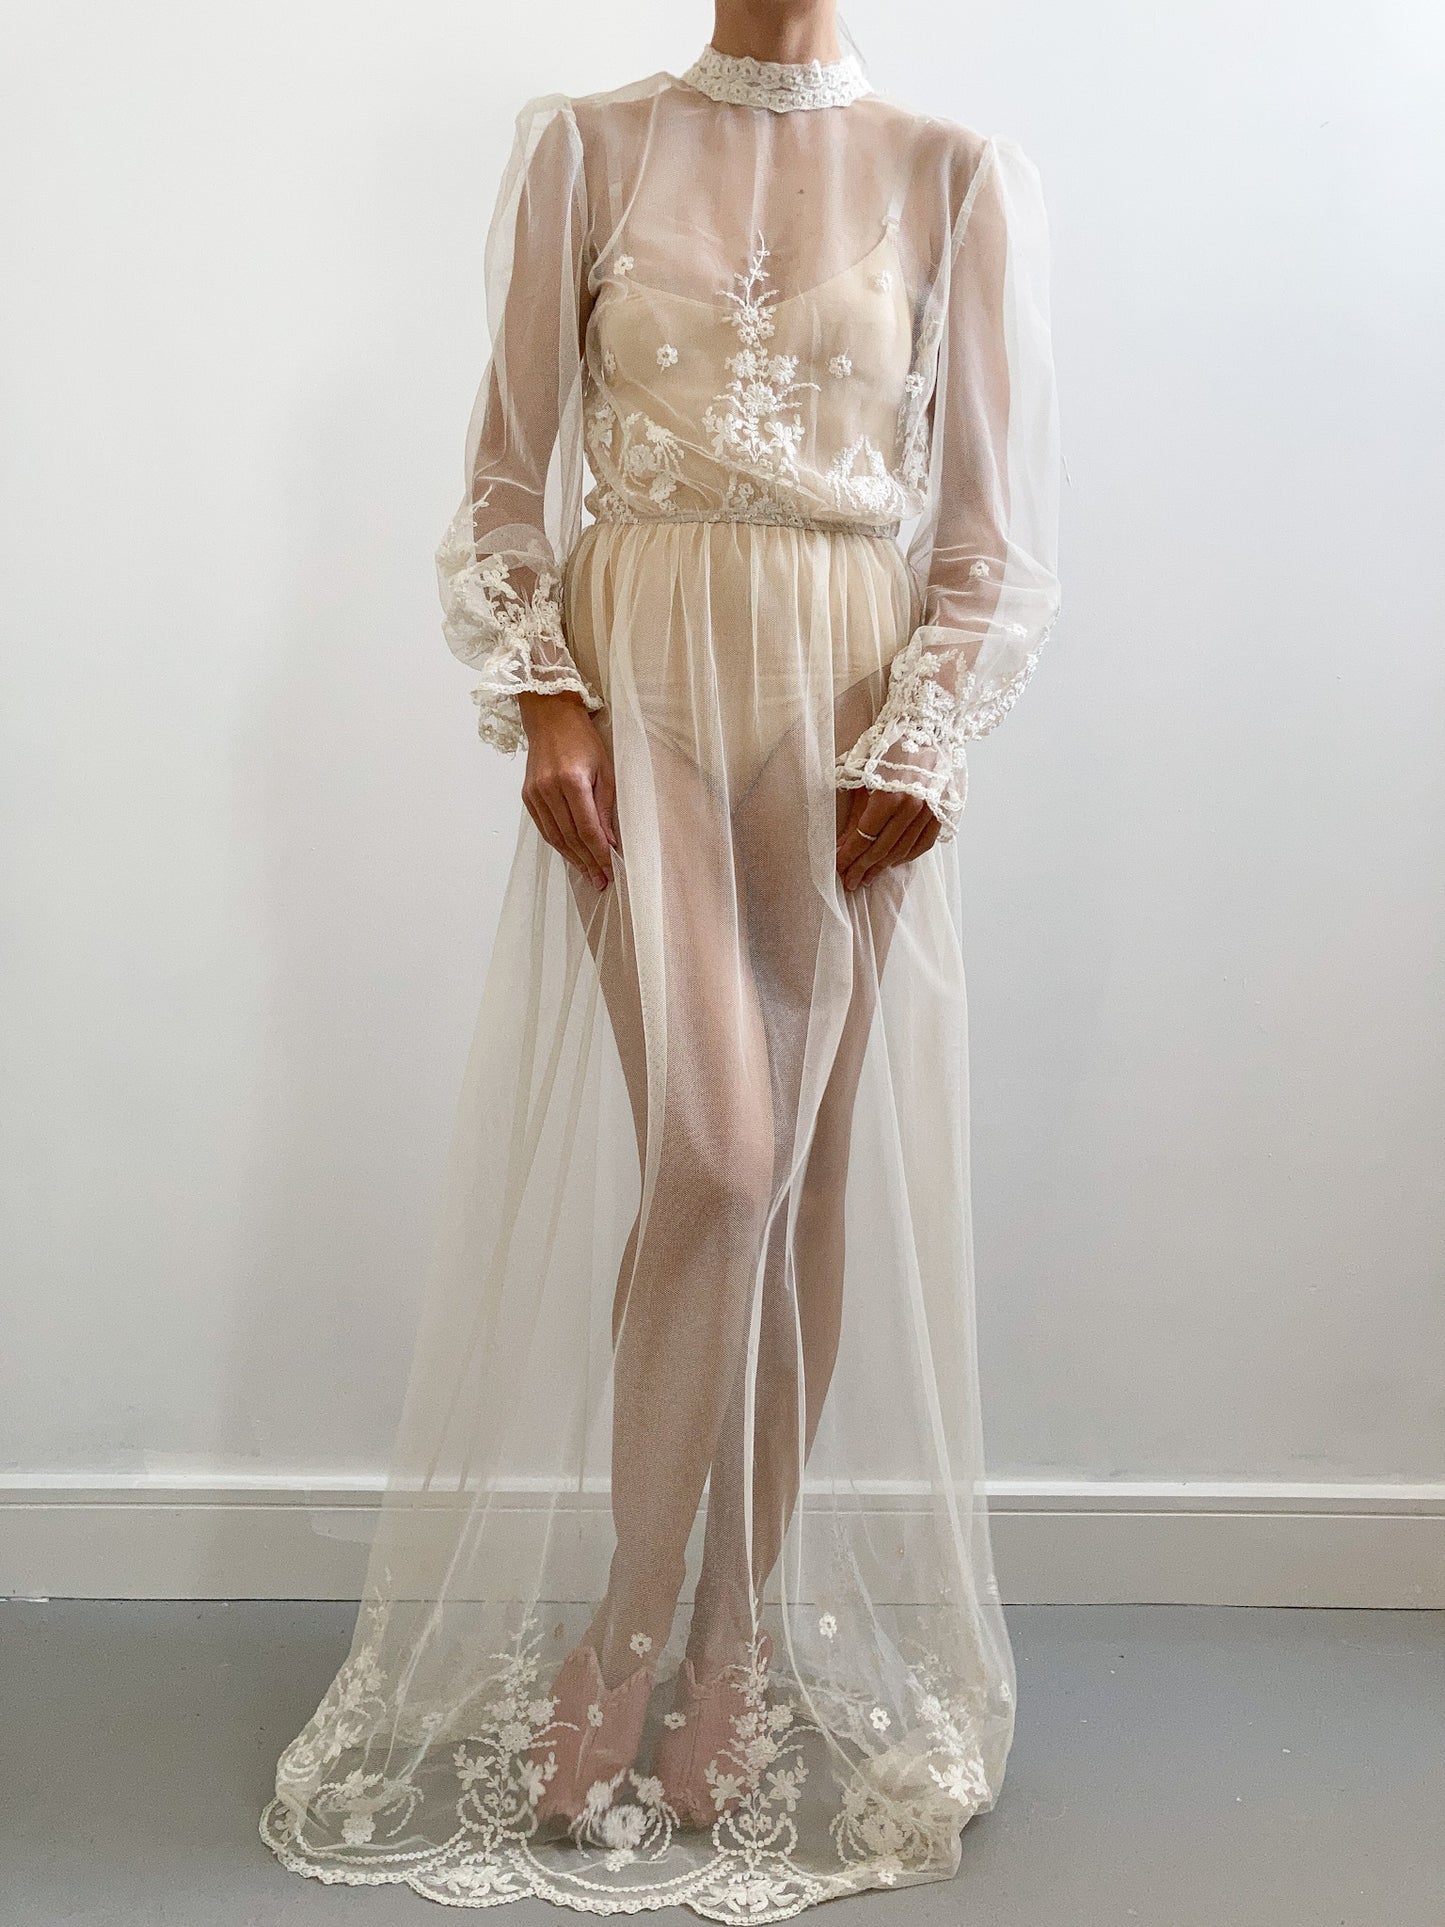 Vintage Sheer Net Wedding Dress with Flower Embroidery